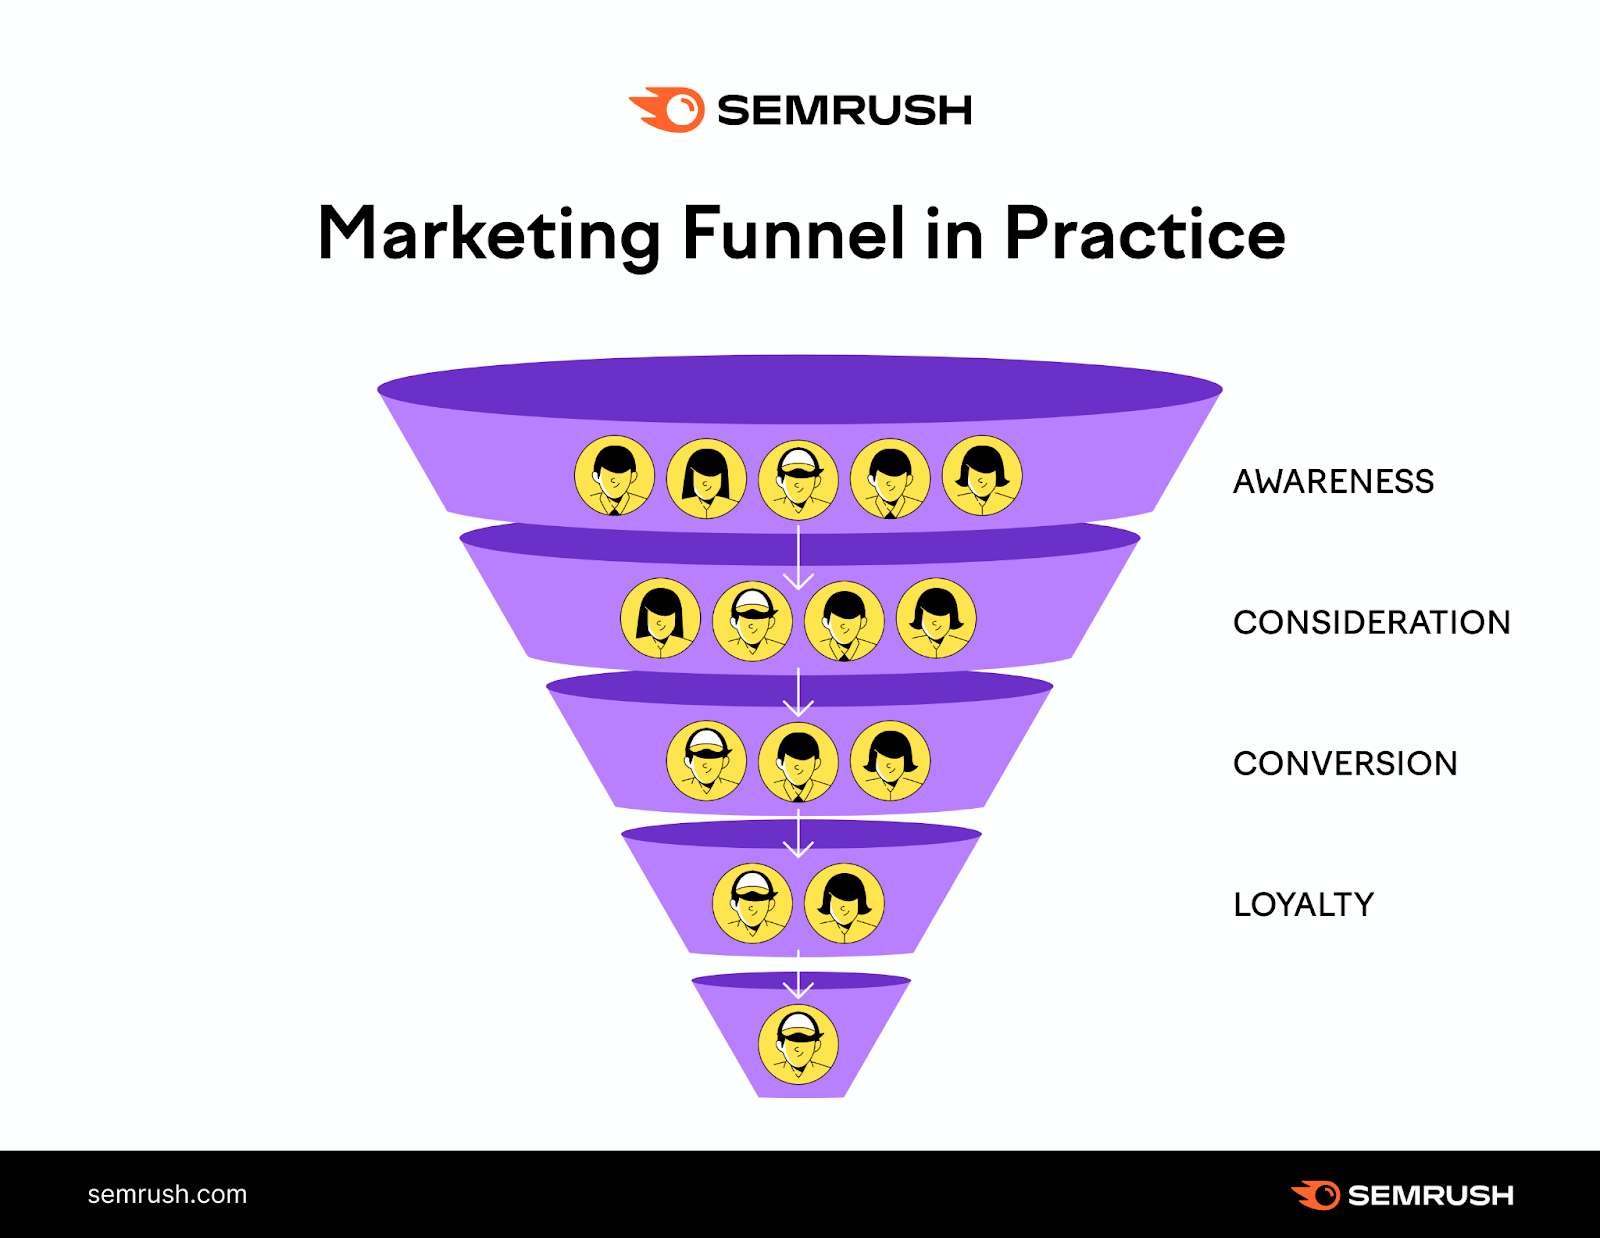 An infographic showing a marketing funnel, with awareness, consideration, conversion and loyalty stages